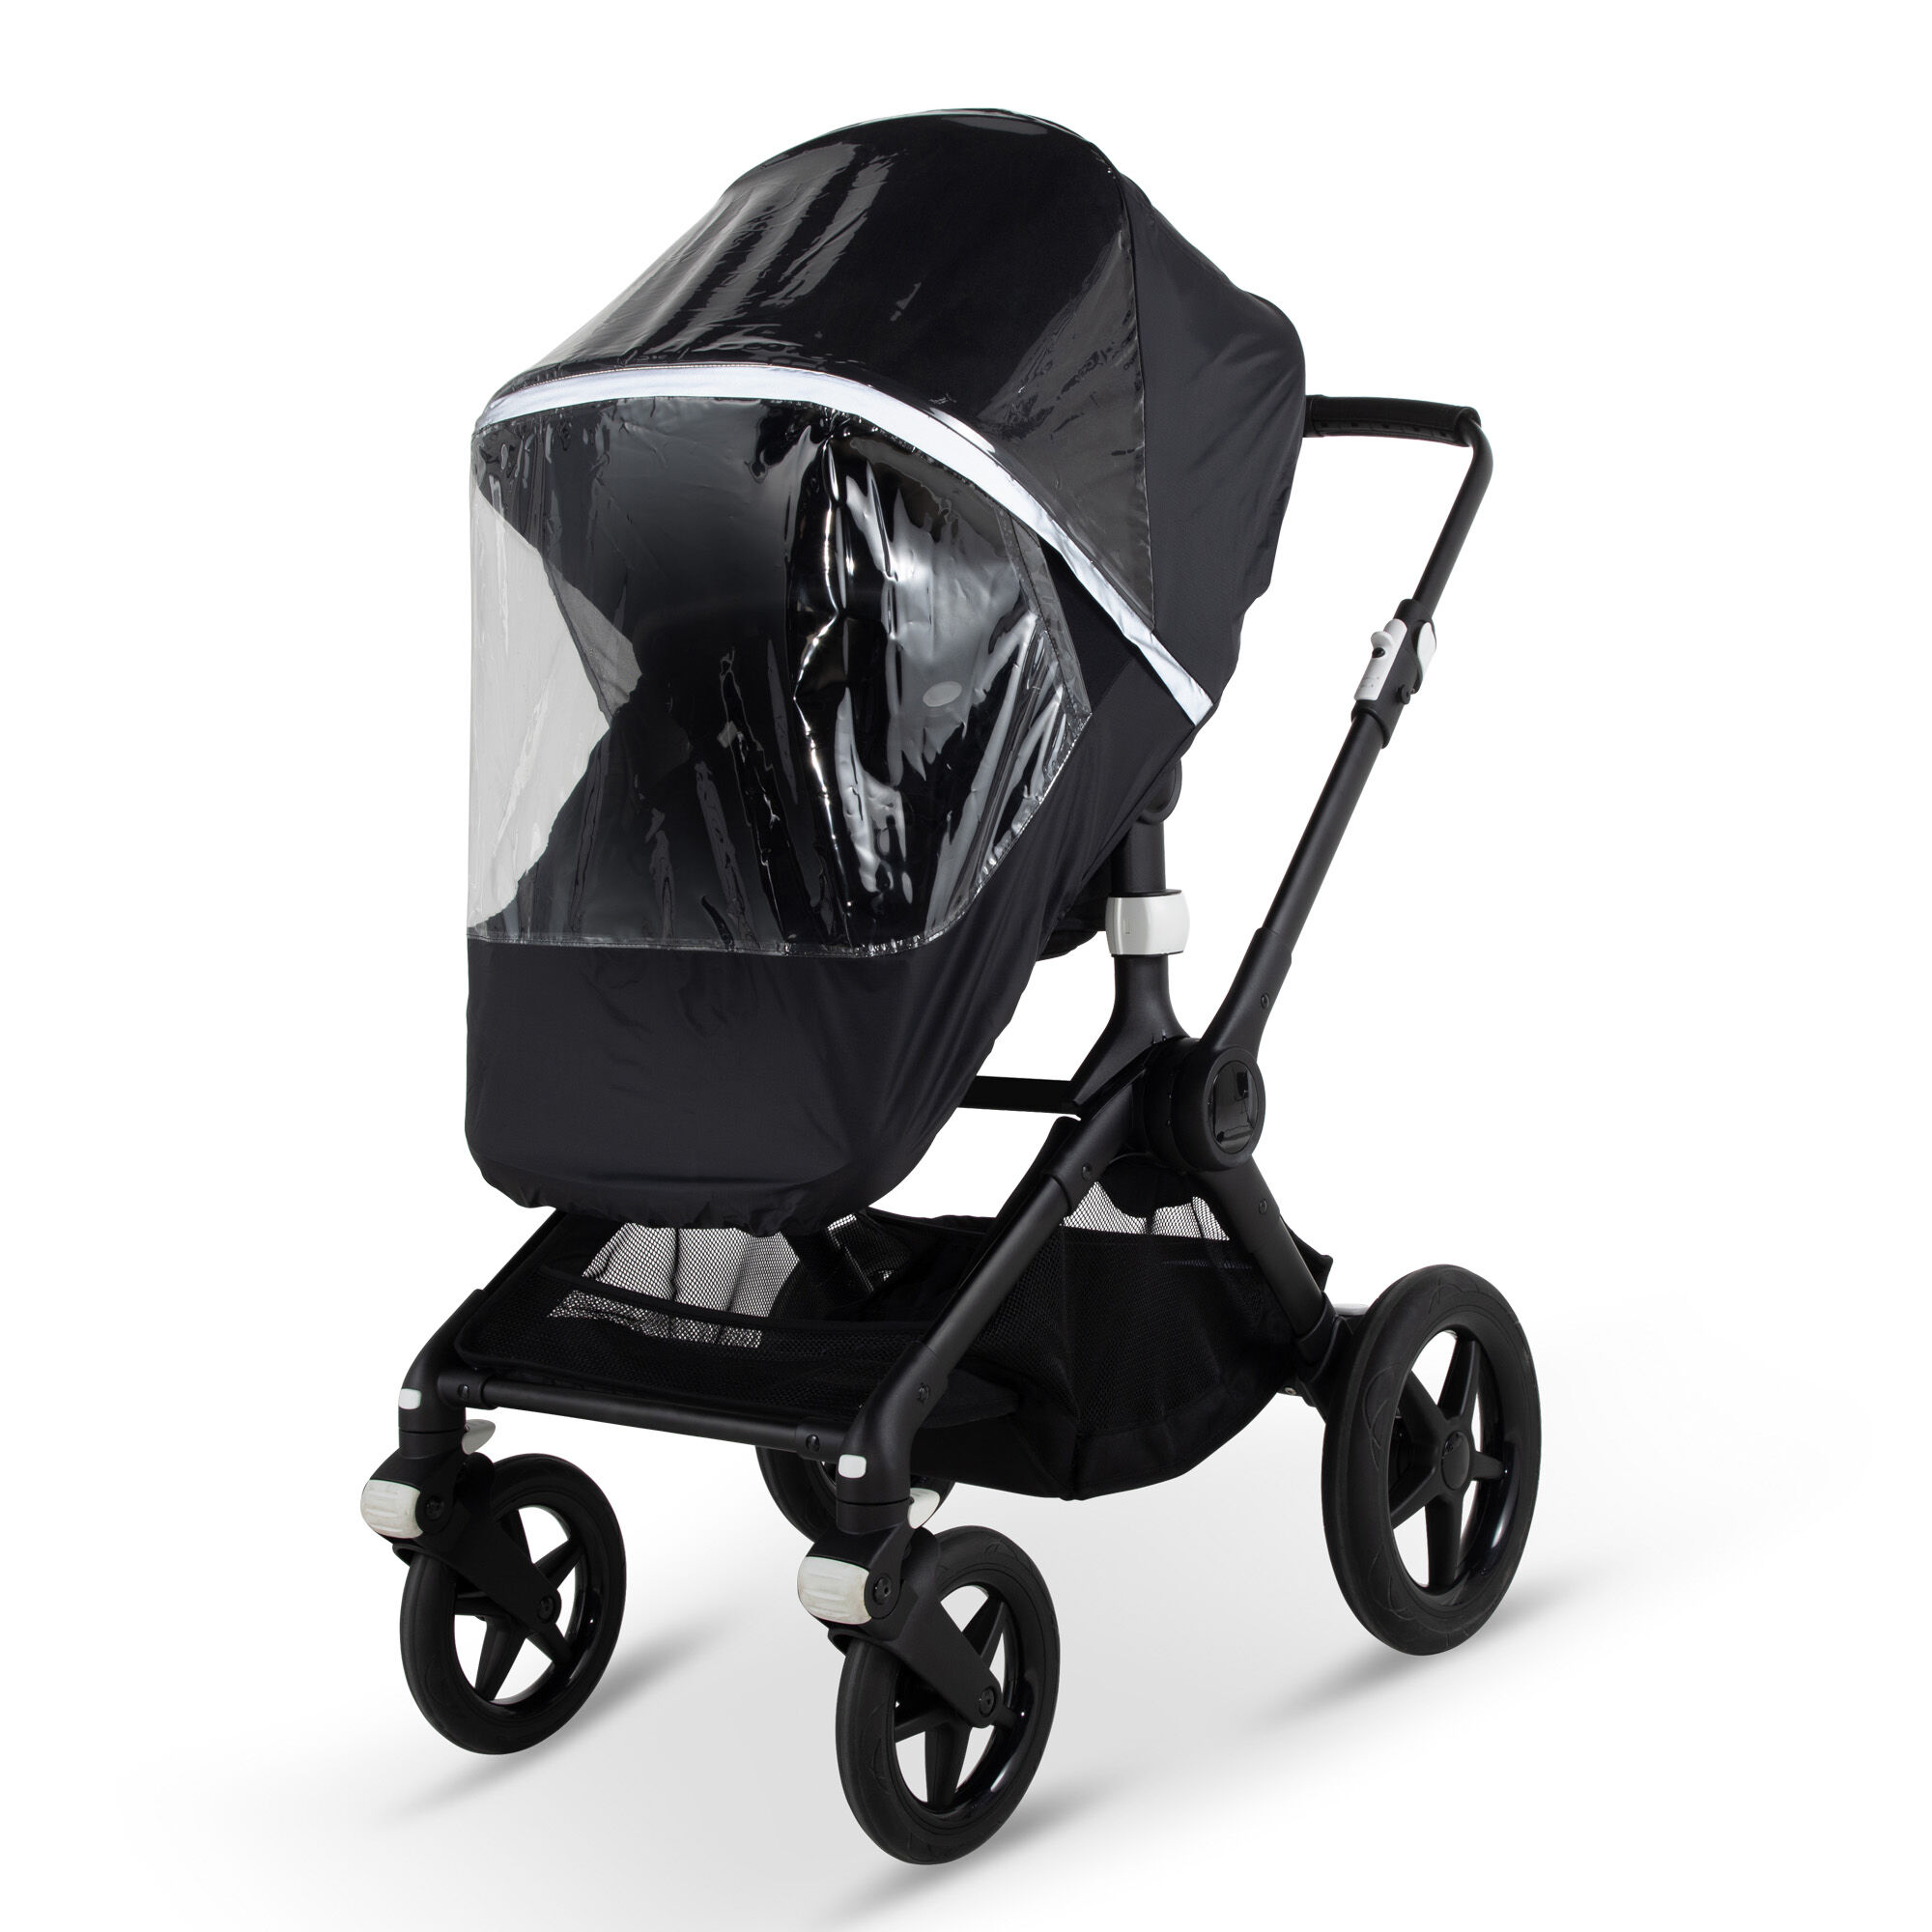 replacement raincover to fit Bugaboo Chameleon 